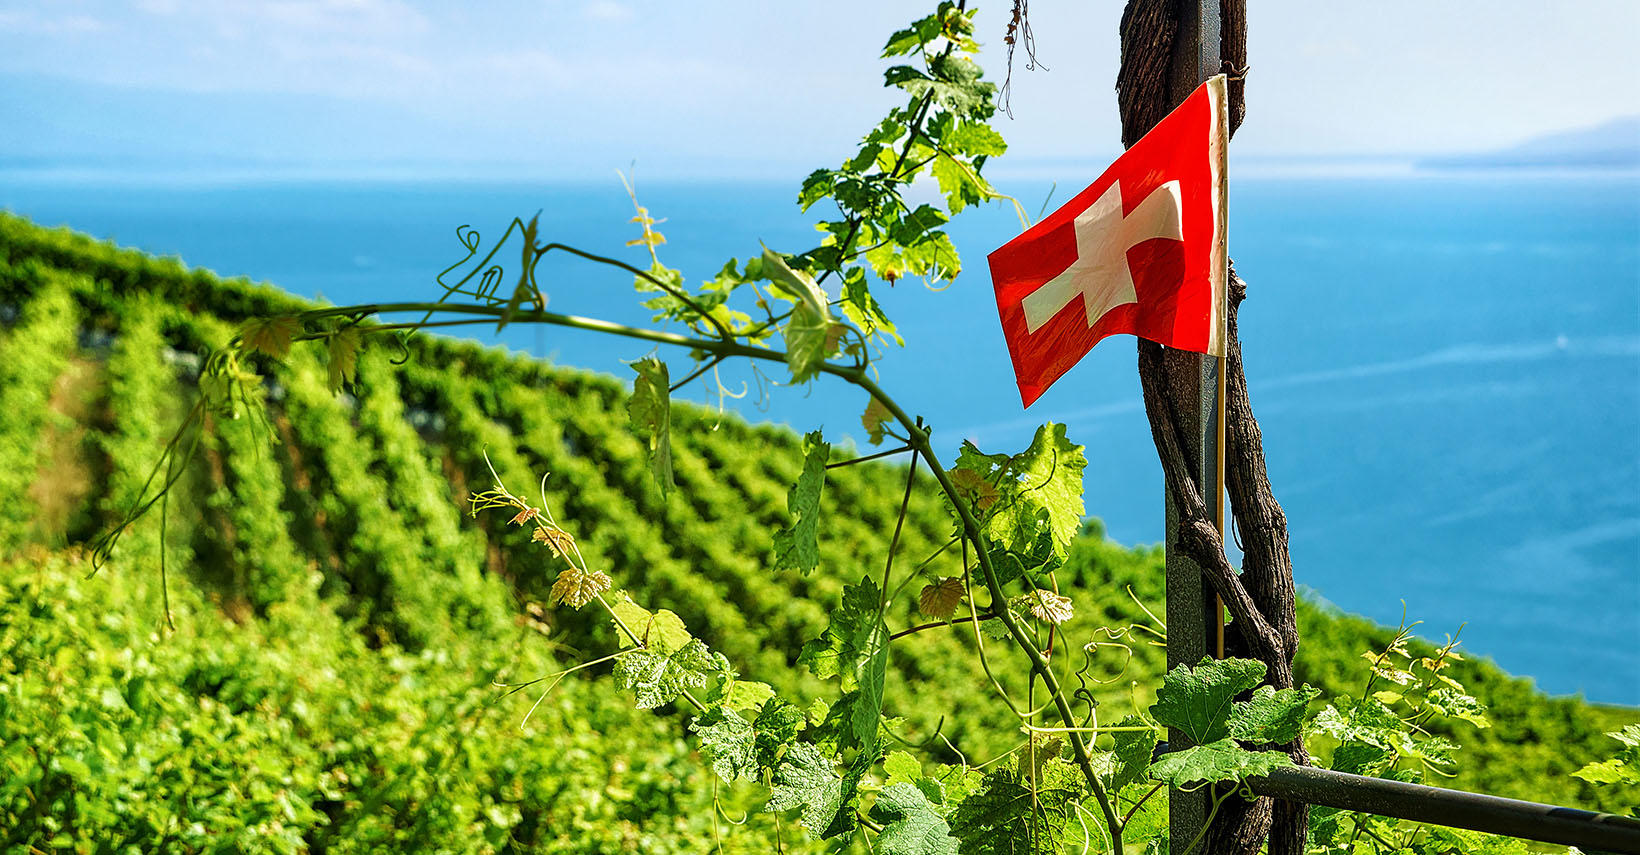 Photography of a vineyard in Switzerland